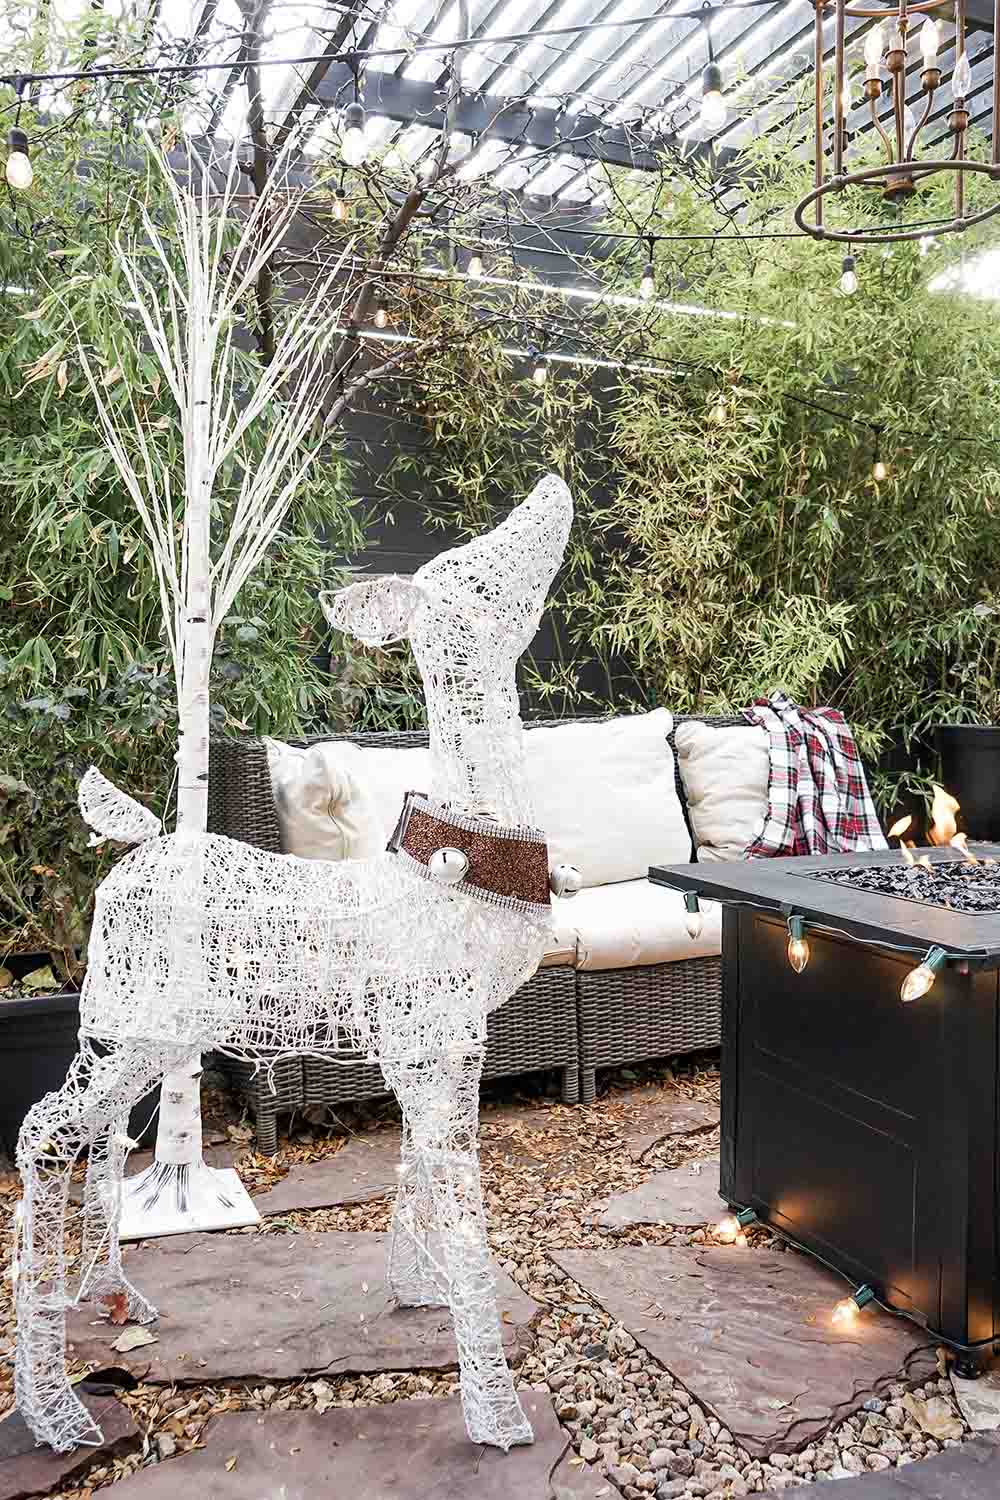 An LED white lighted deer with a collar.